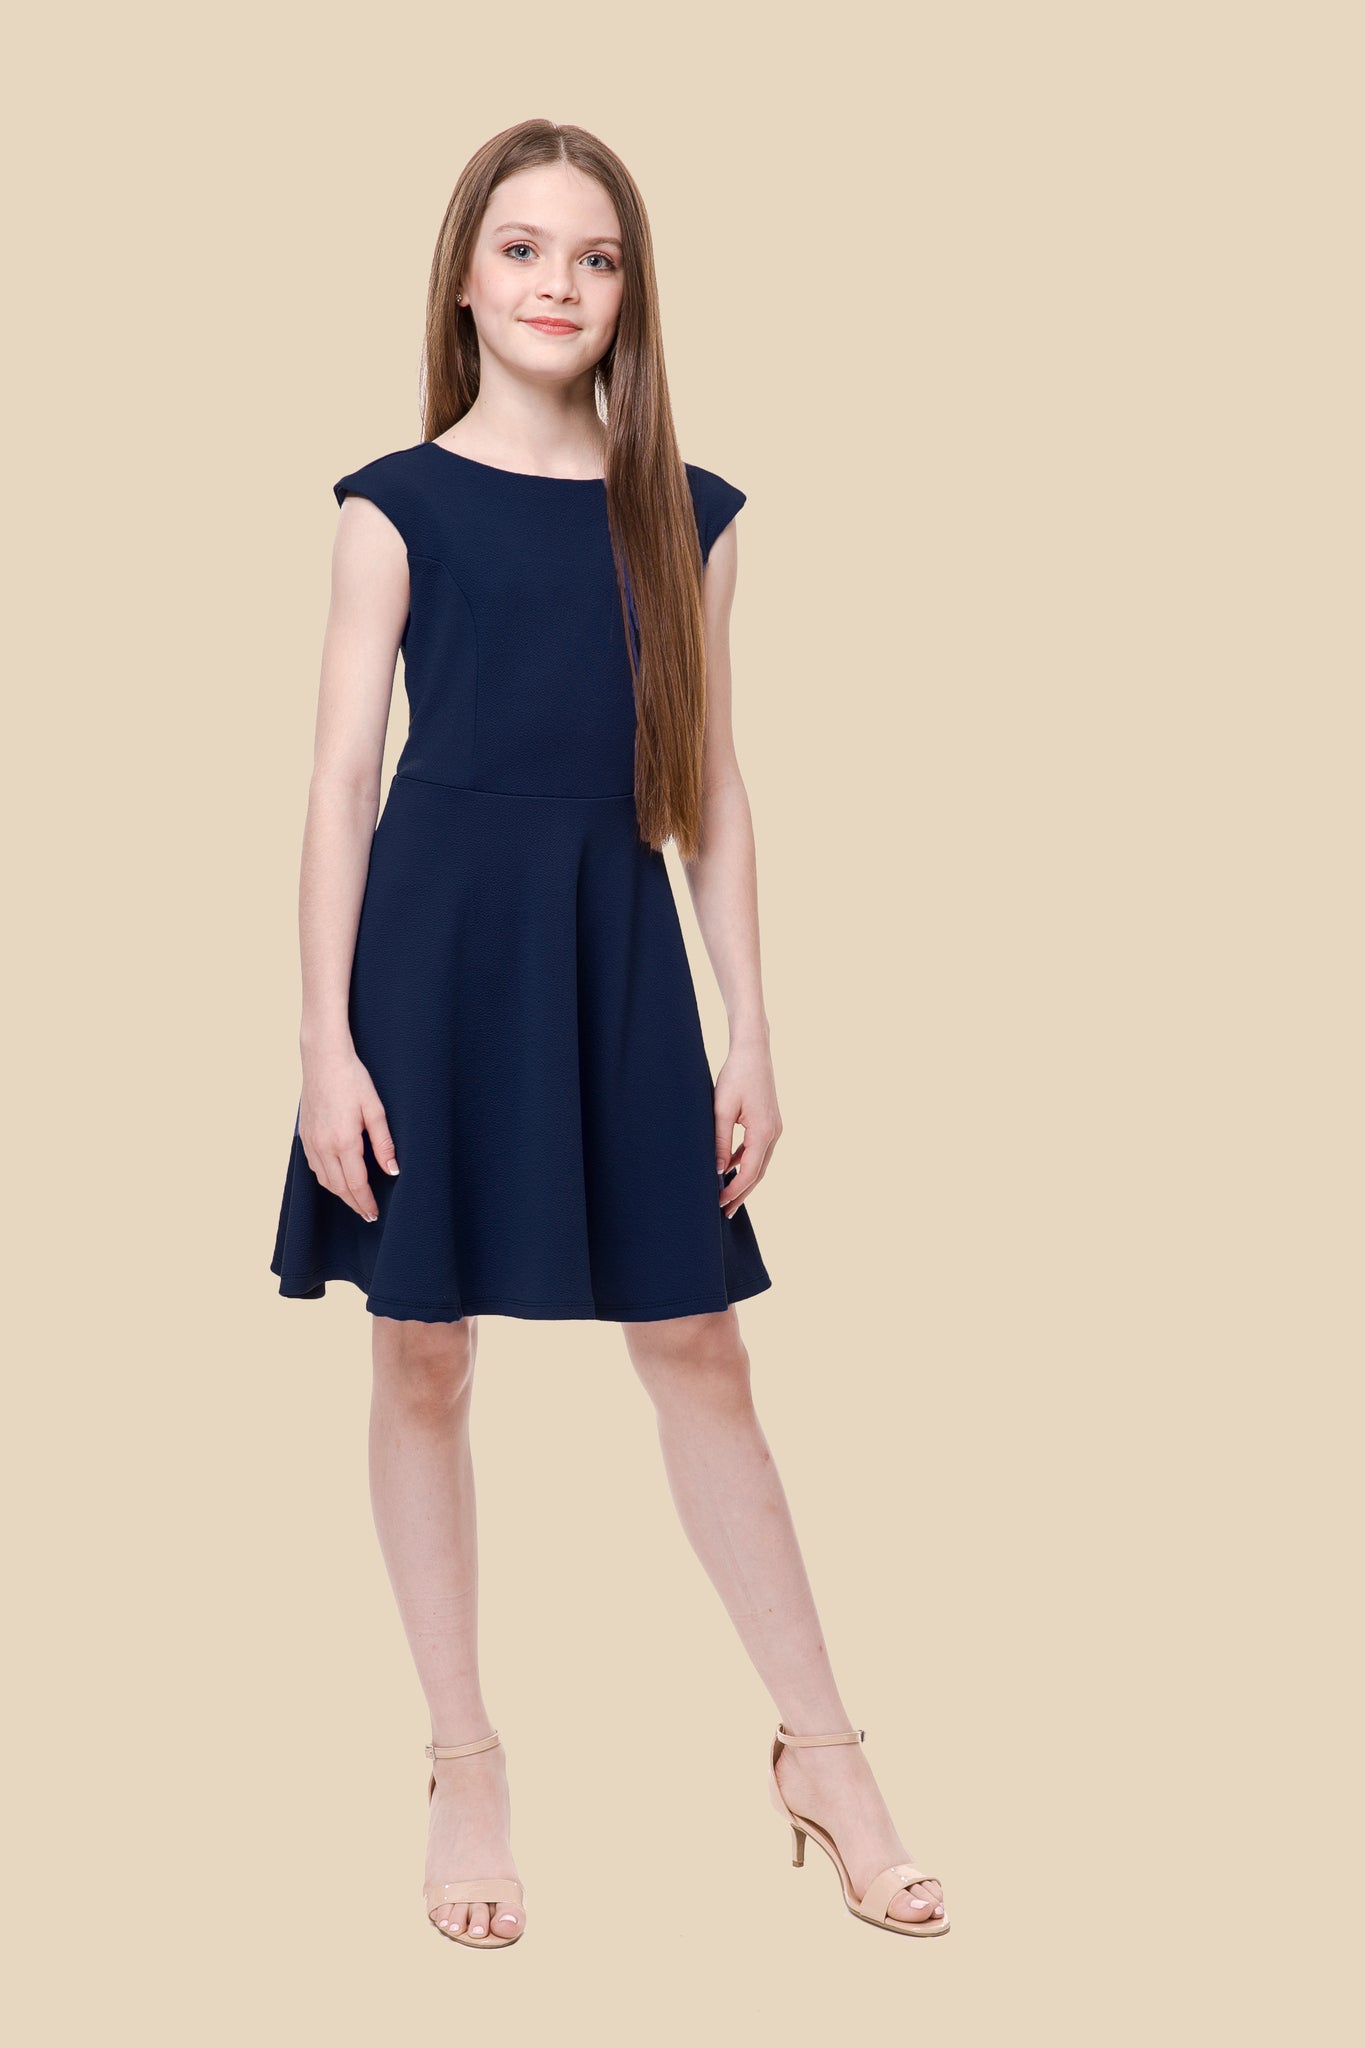 The cap sleeve textured fit and flare dress is shown in nabvy blue with high neck line, shoulder coverage and lower v-back detailing for a chic and sophisticated look. This dress can be worn to a more coservative special occasion event like cotillion, graduation, or religious service like a bat mitzvah service or church ceremony.